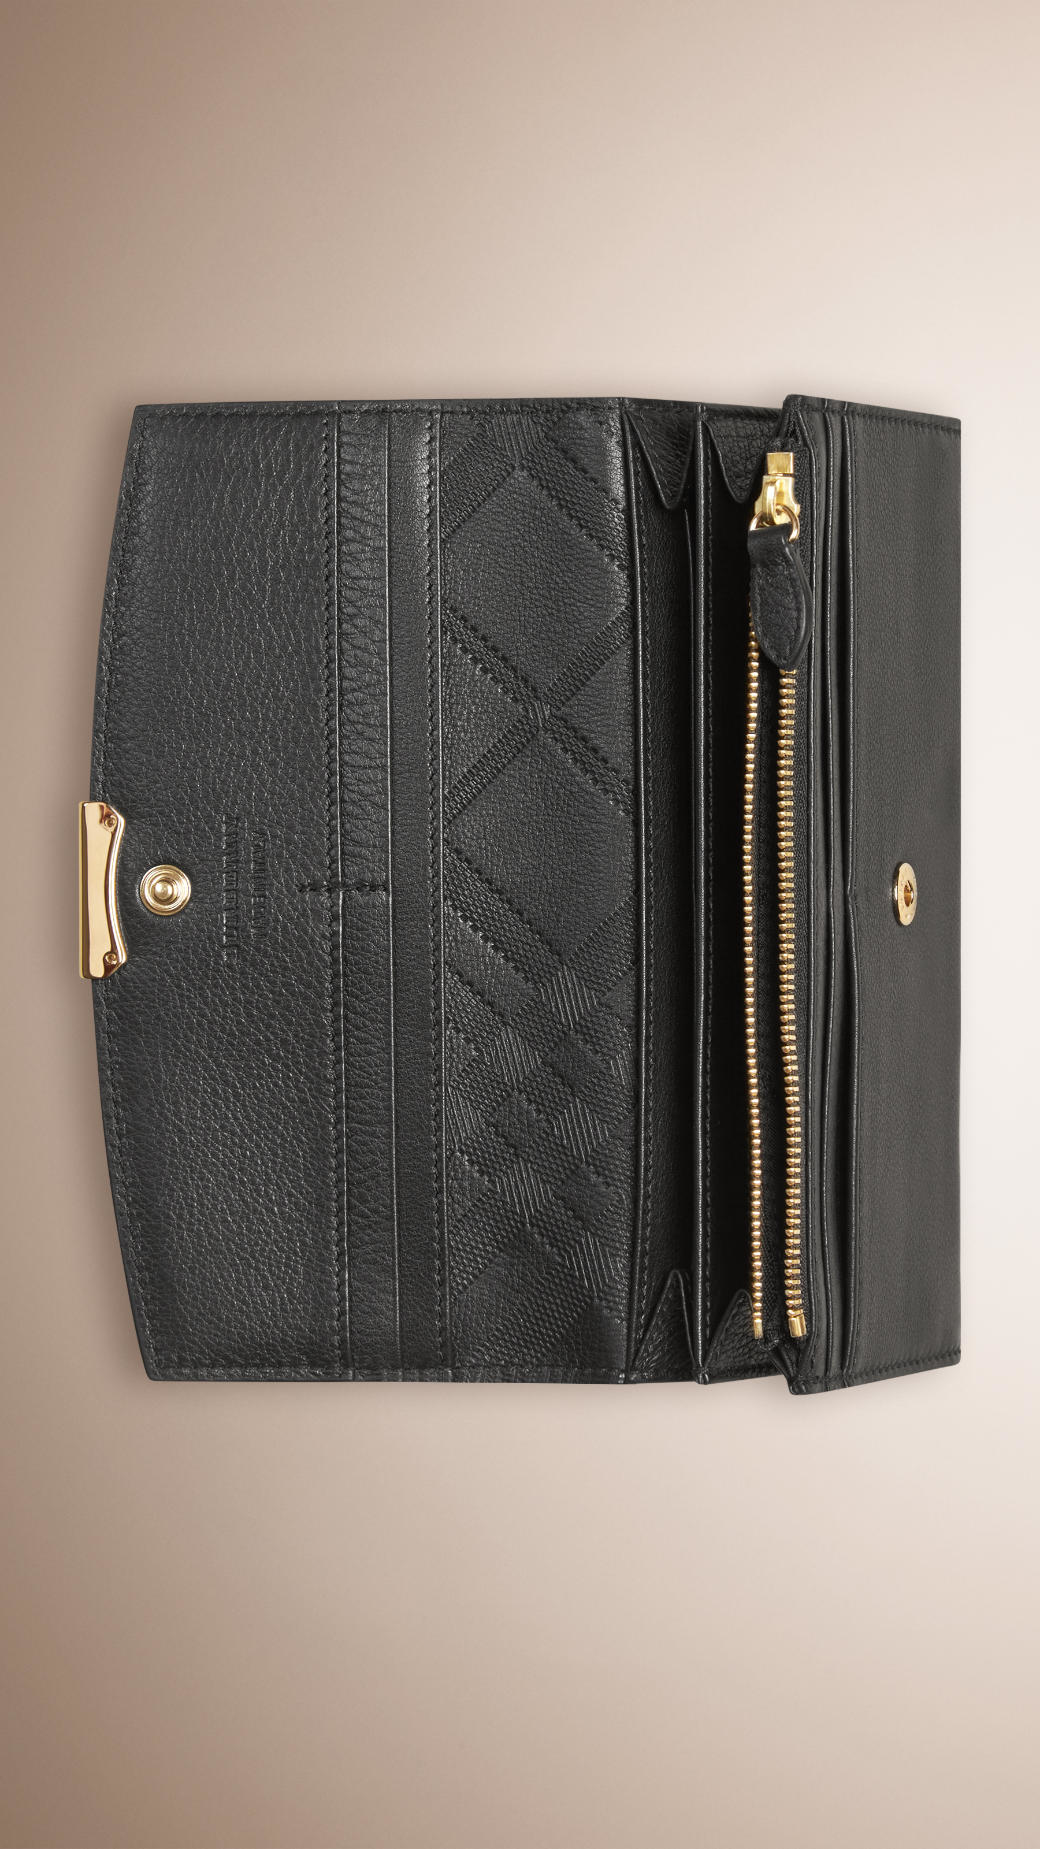 Burberry Press-Stud Leather Wallet in Black - Lyst